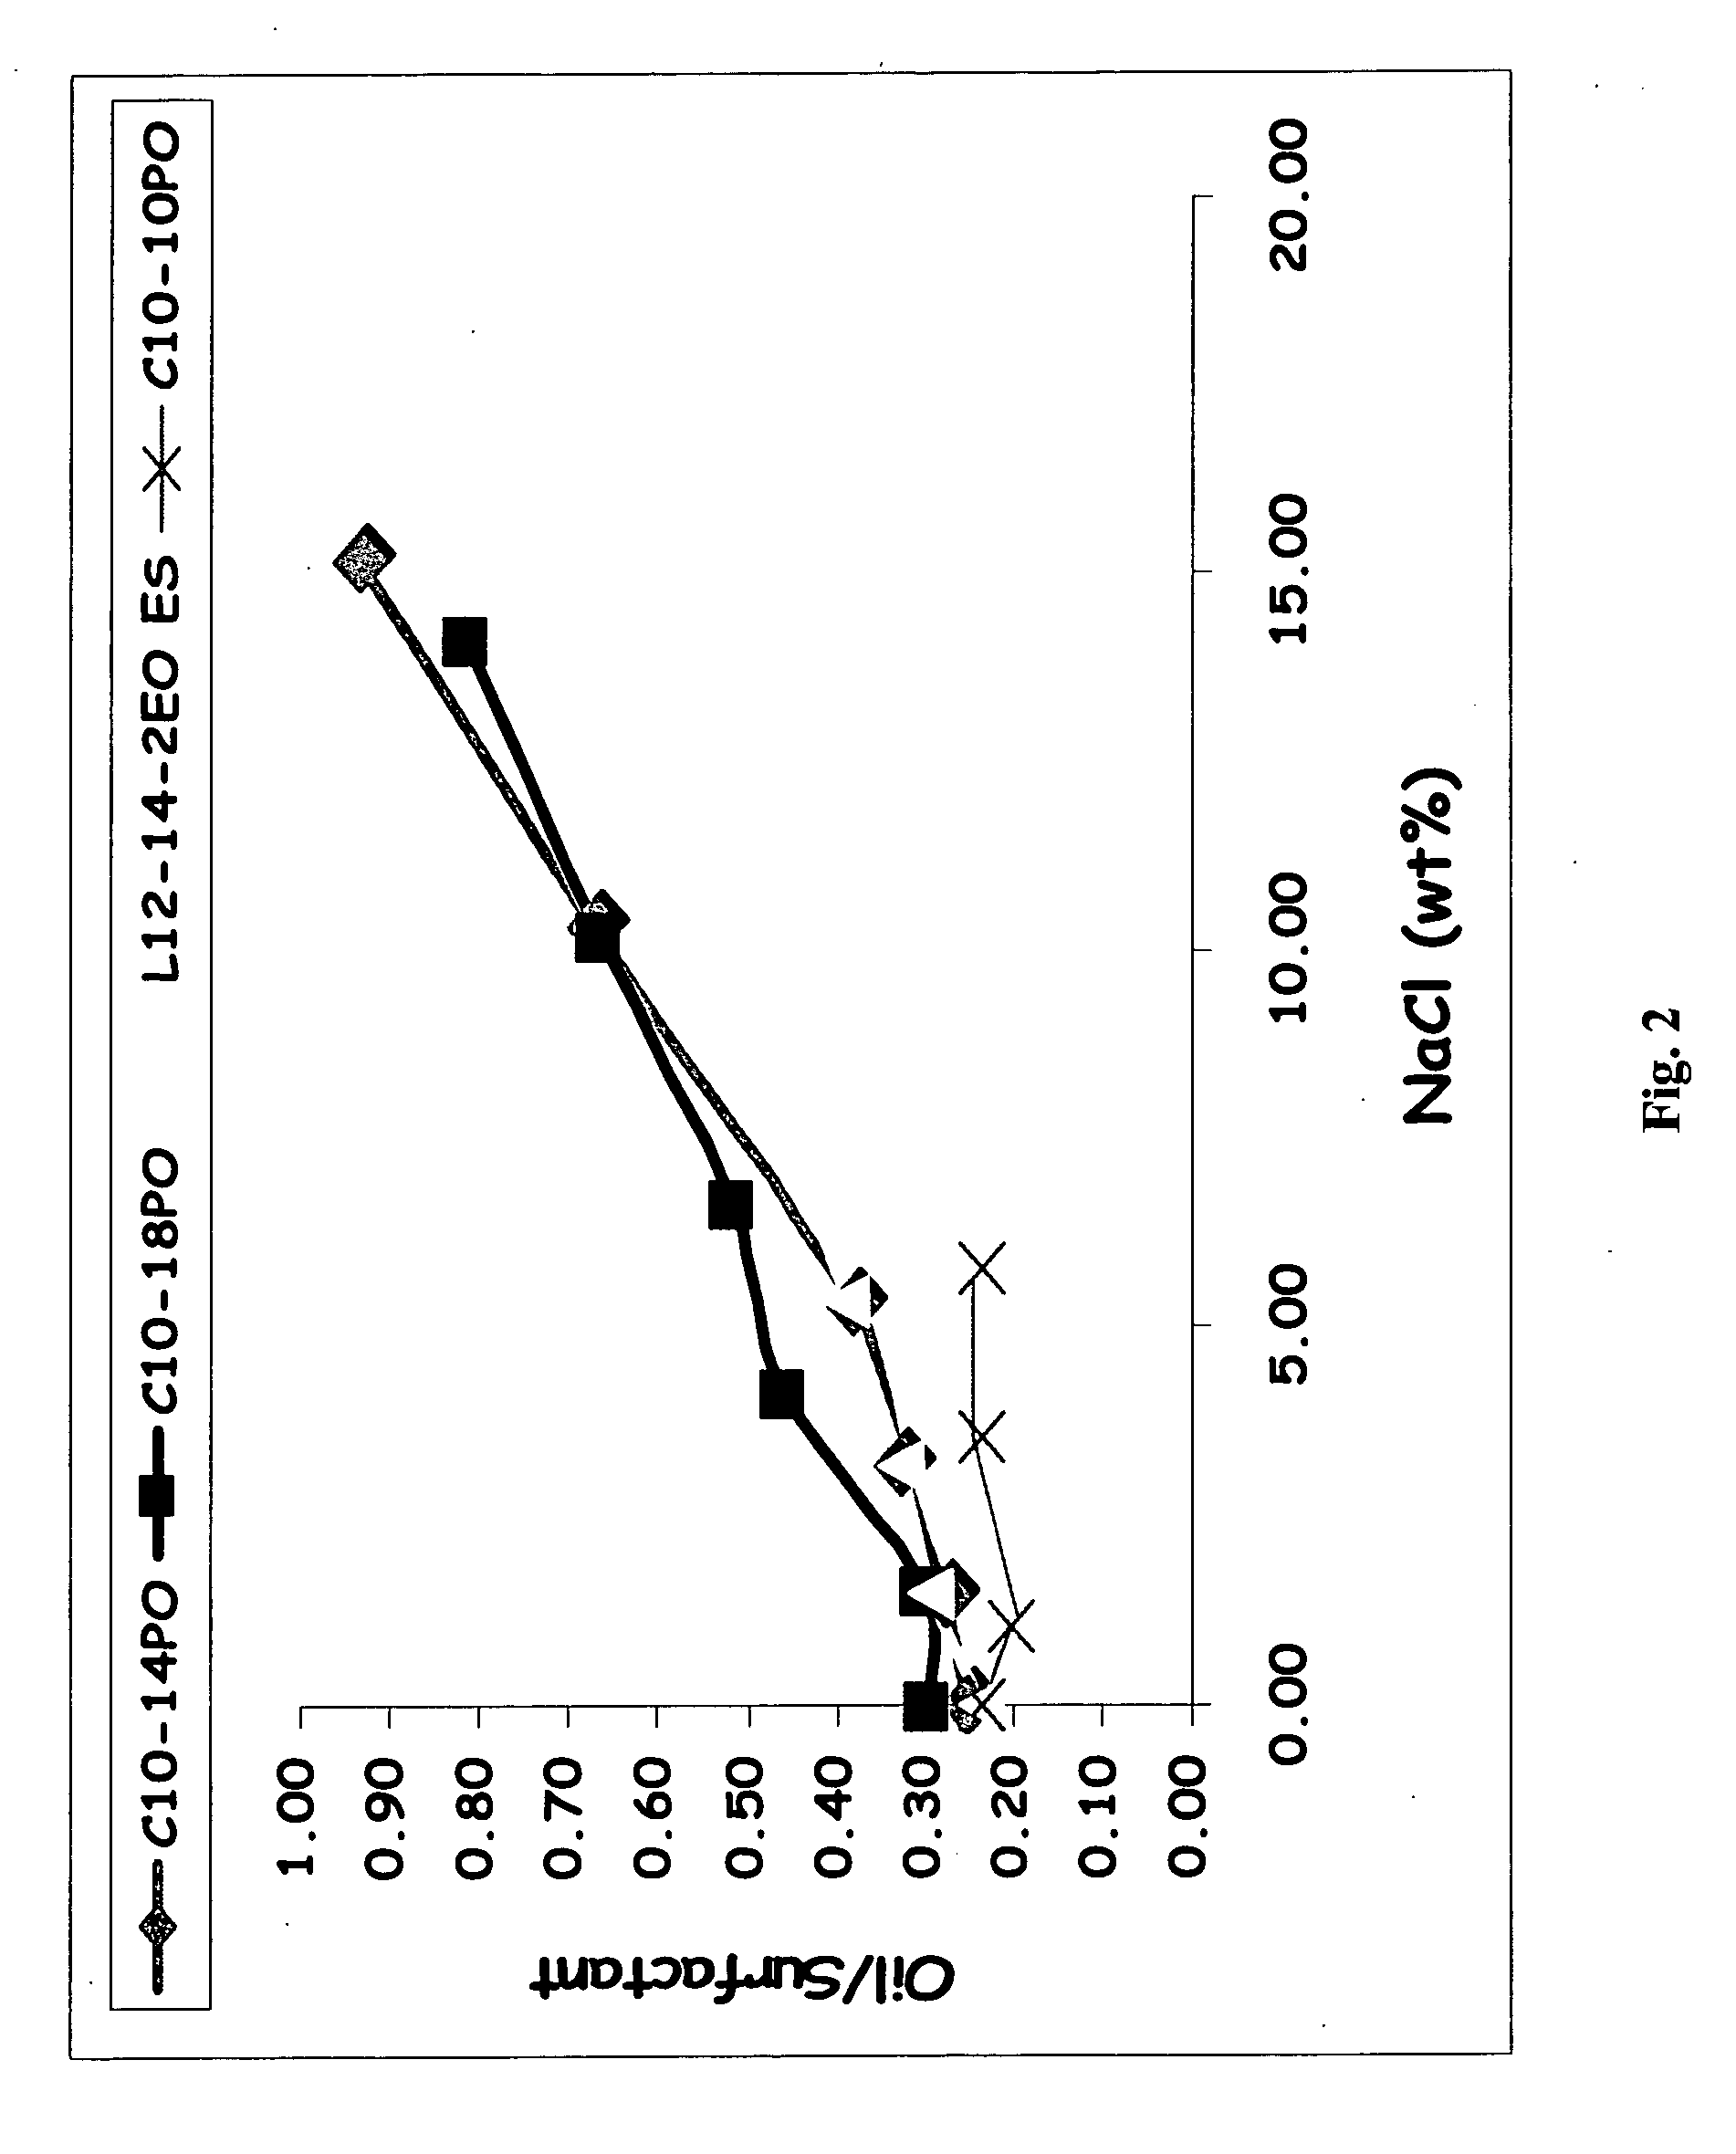 Enhanced solubilization using extended chain surfactants